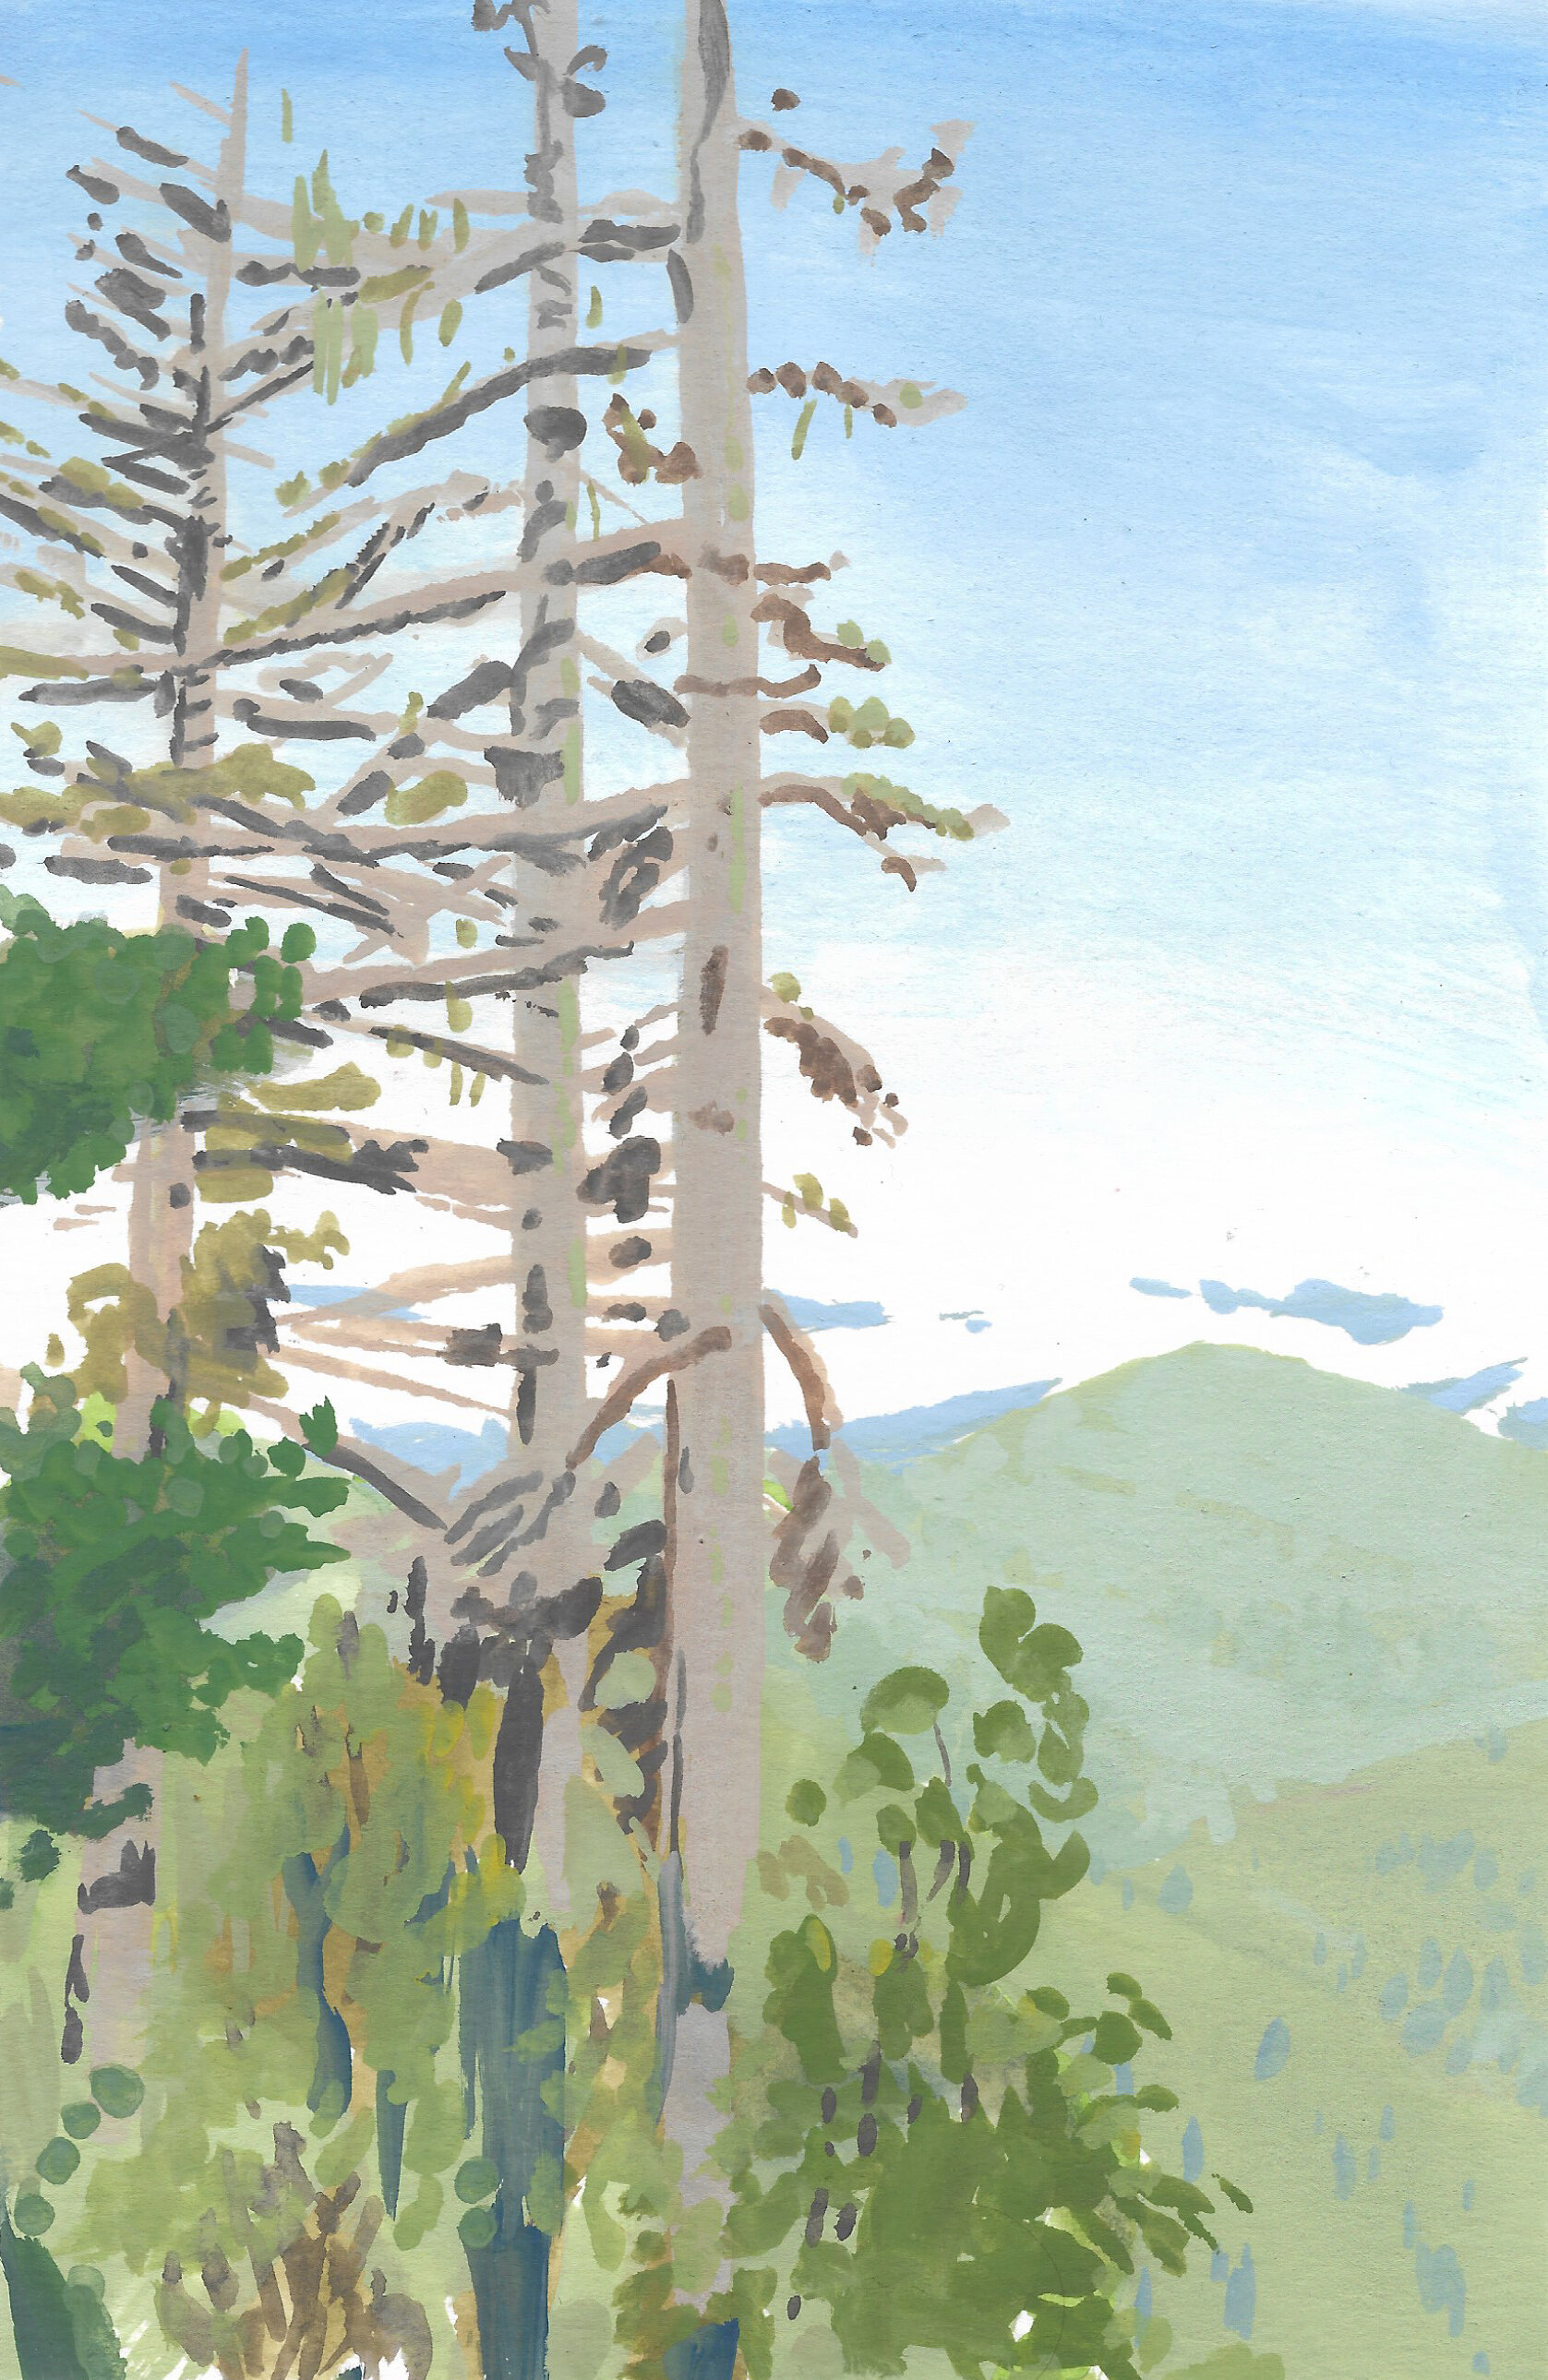  Cliff Nature, Morning mist (2019)  6” x 4” — gouache on paper  Available for purchase.  